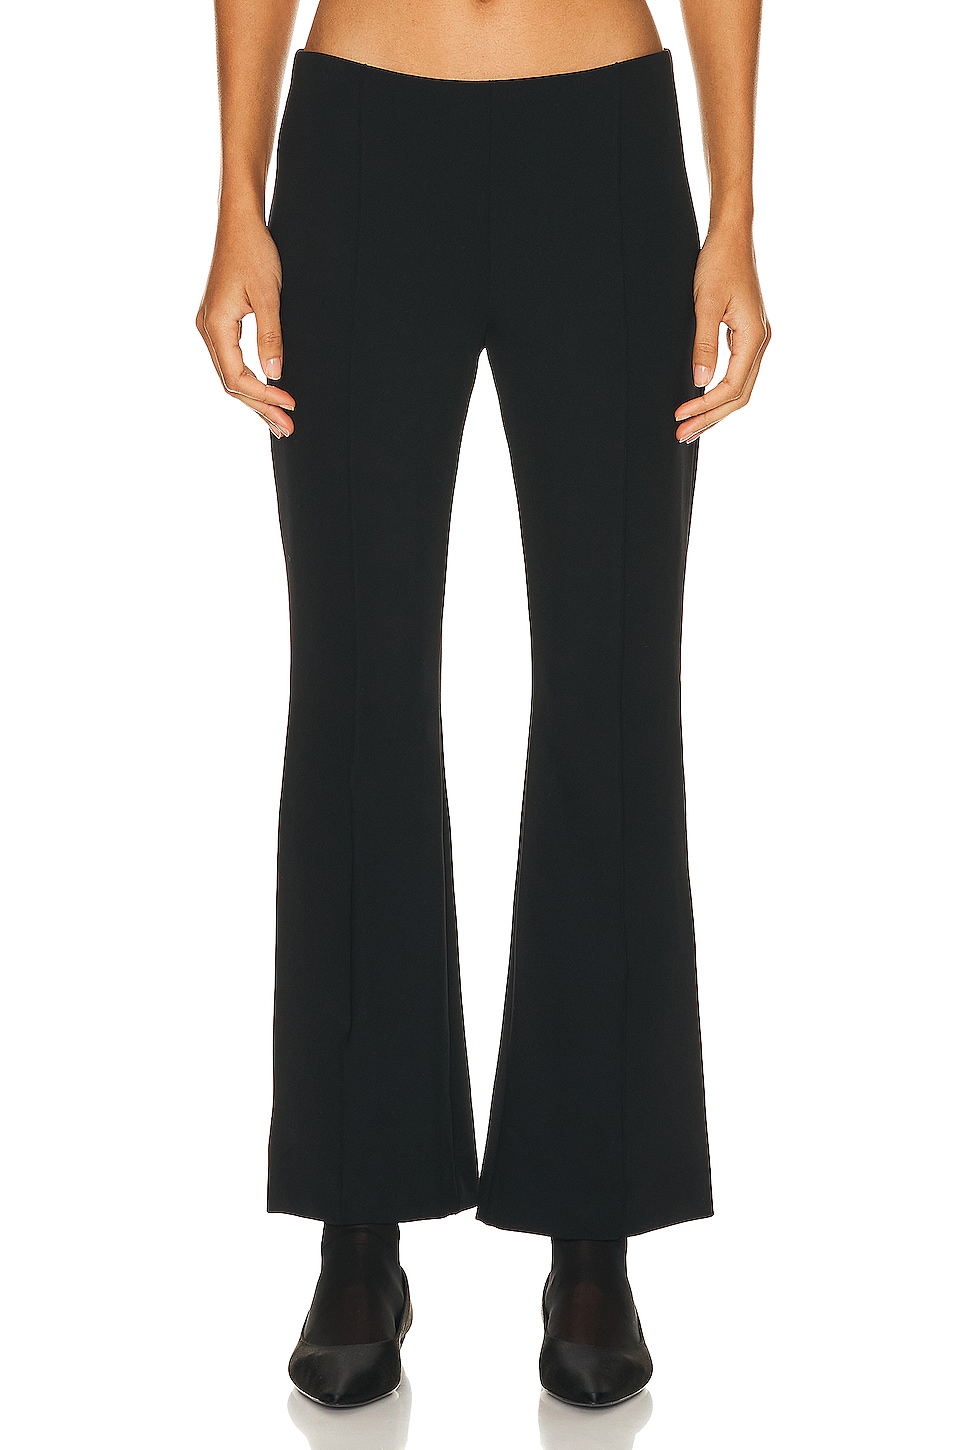 Image 1 of The Row Beca Pant in Black